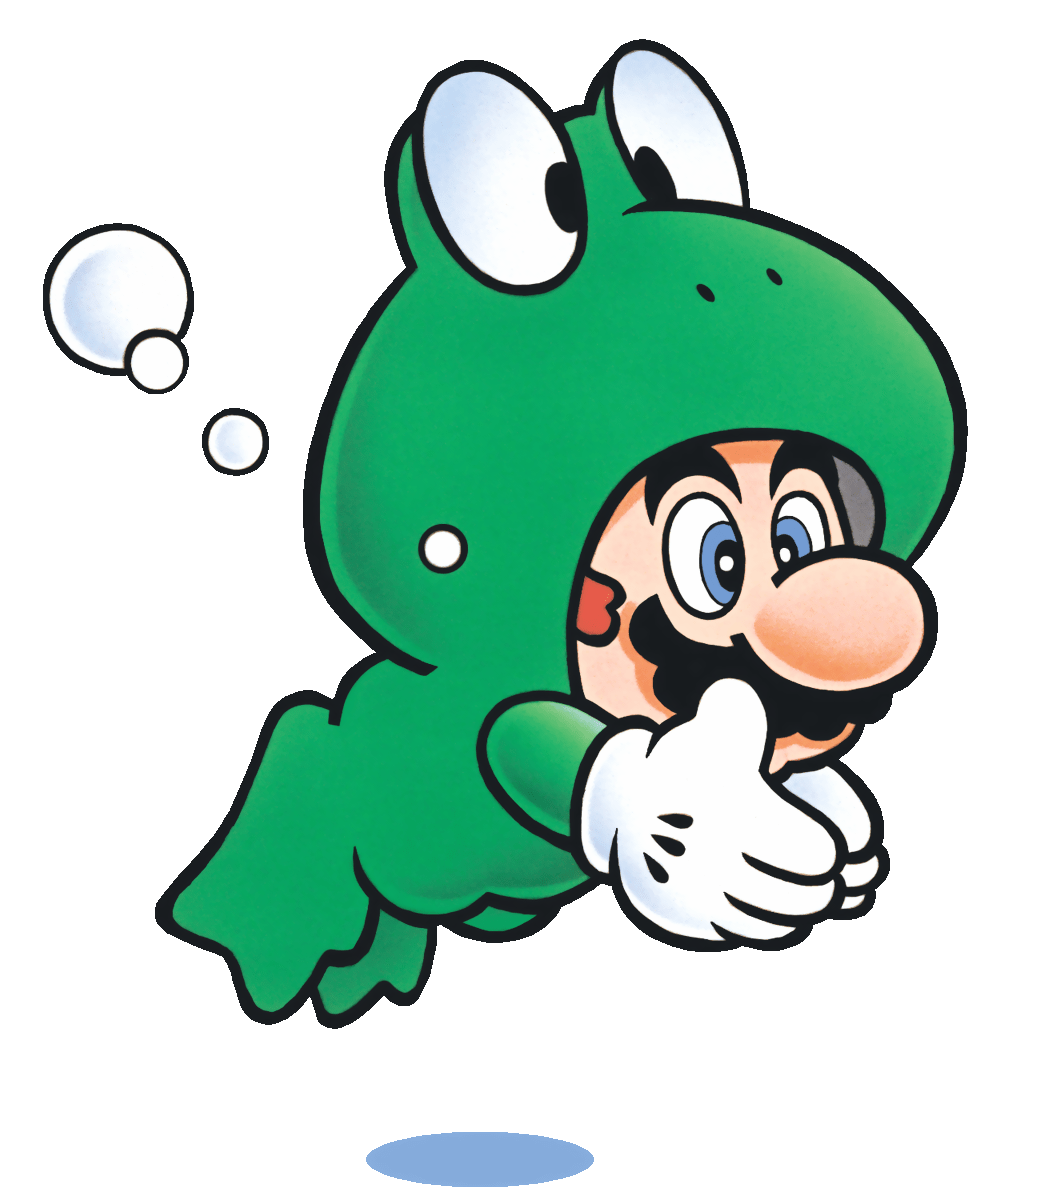 A picture of the Super Mario Bros 3 character "Mario", dressed as a frog.